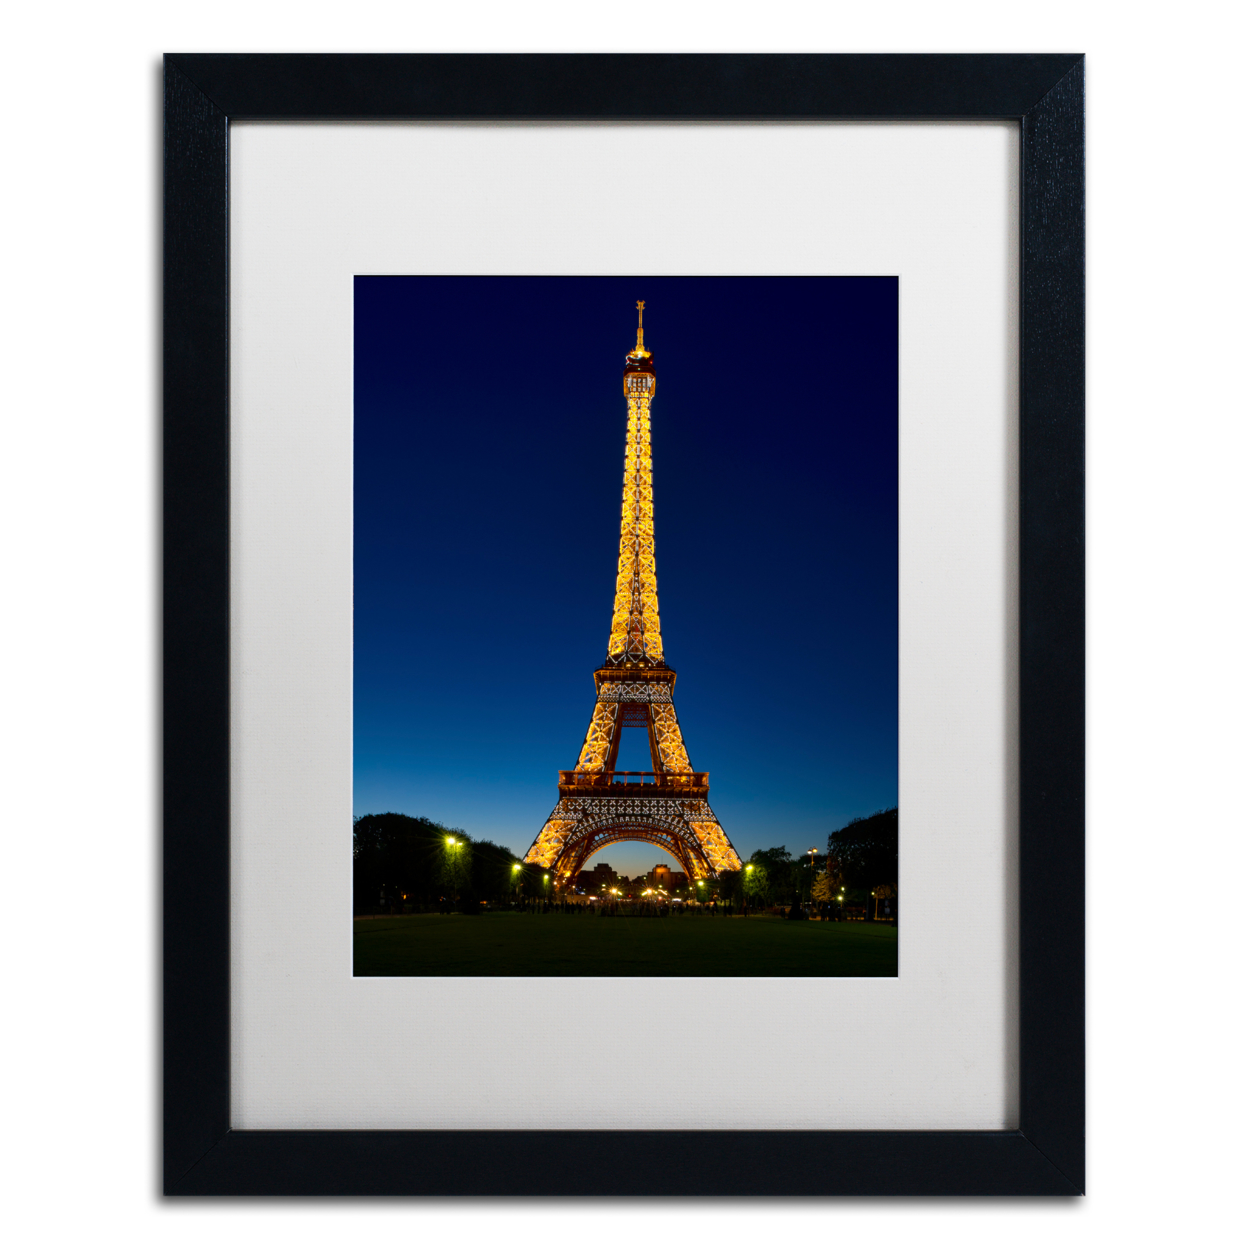 Michael Blanchette Photography 'Evening Light Show' Black Wooden Framed Art 18 X 22 Inches